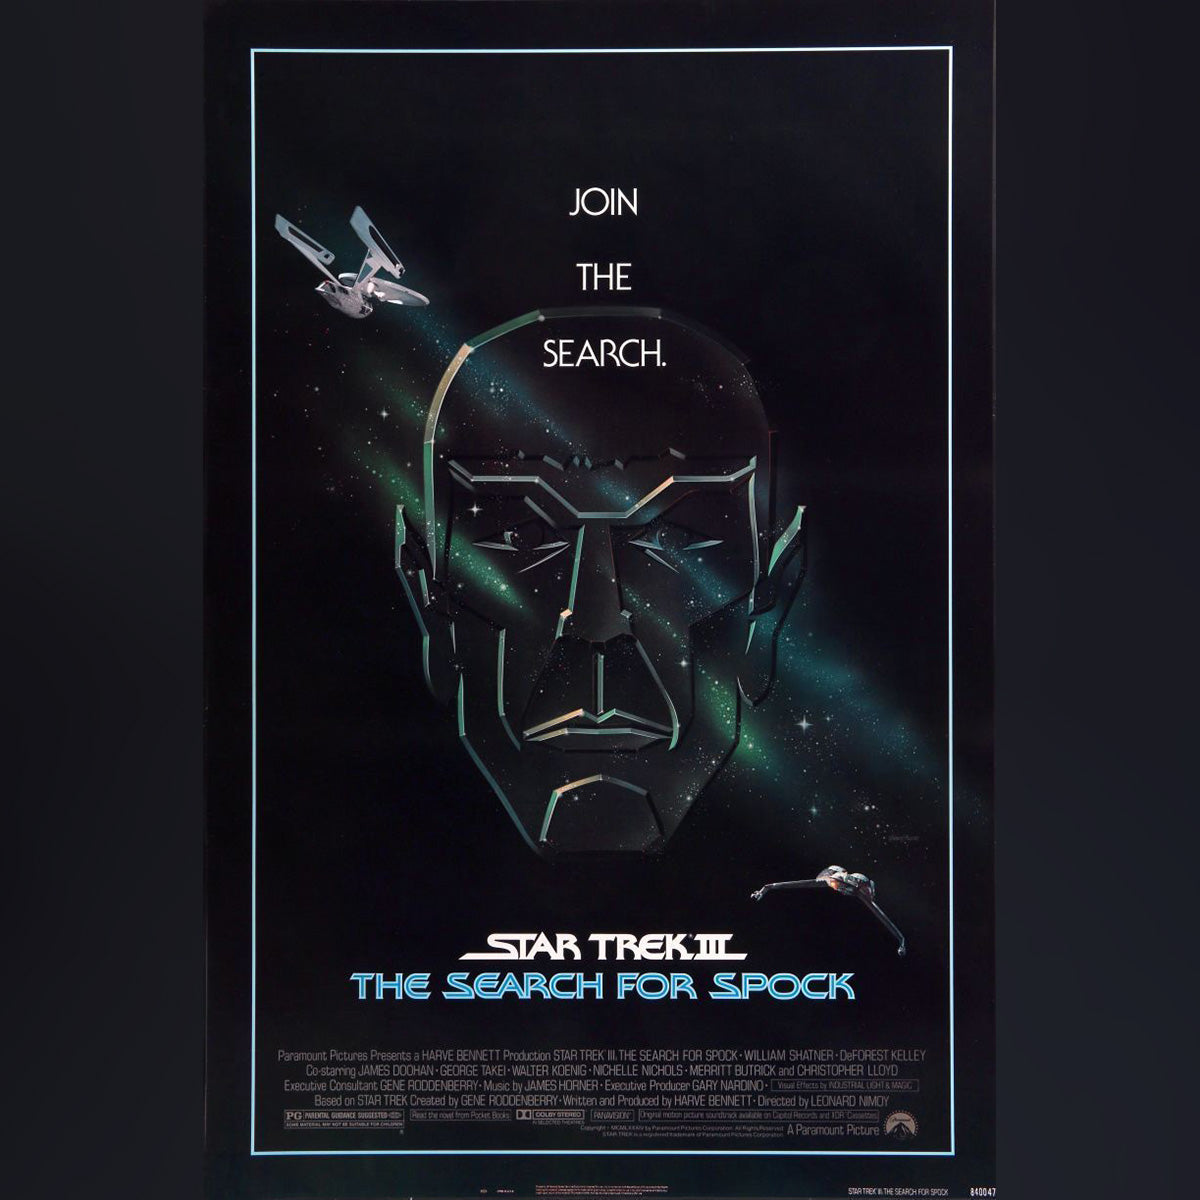 Original Movie Poster of Star Trek Iii: The Search For Spock (1984)